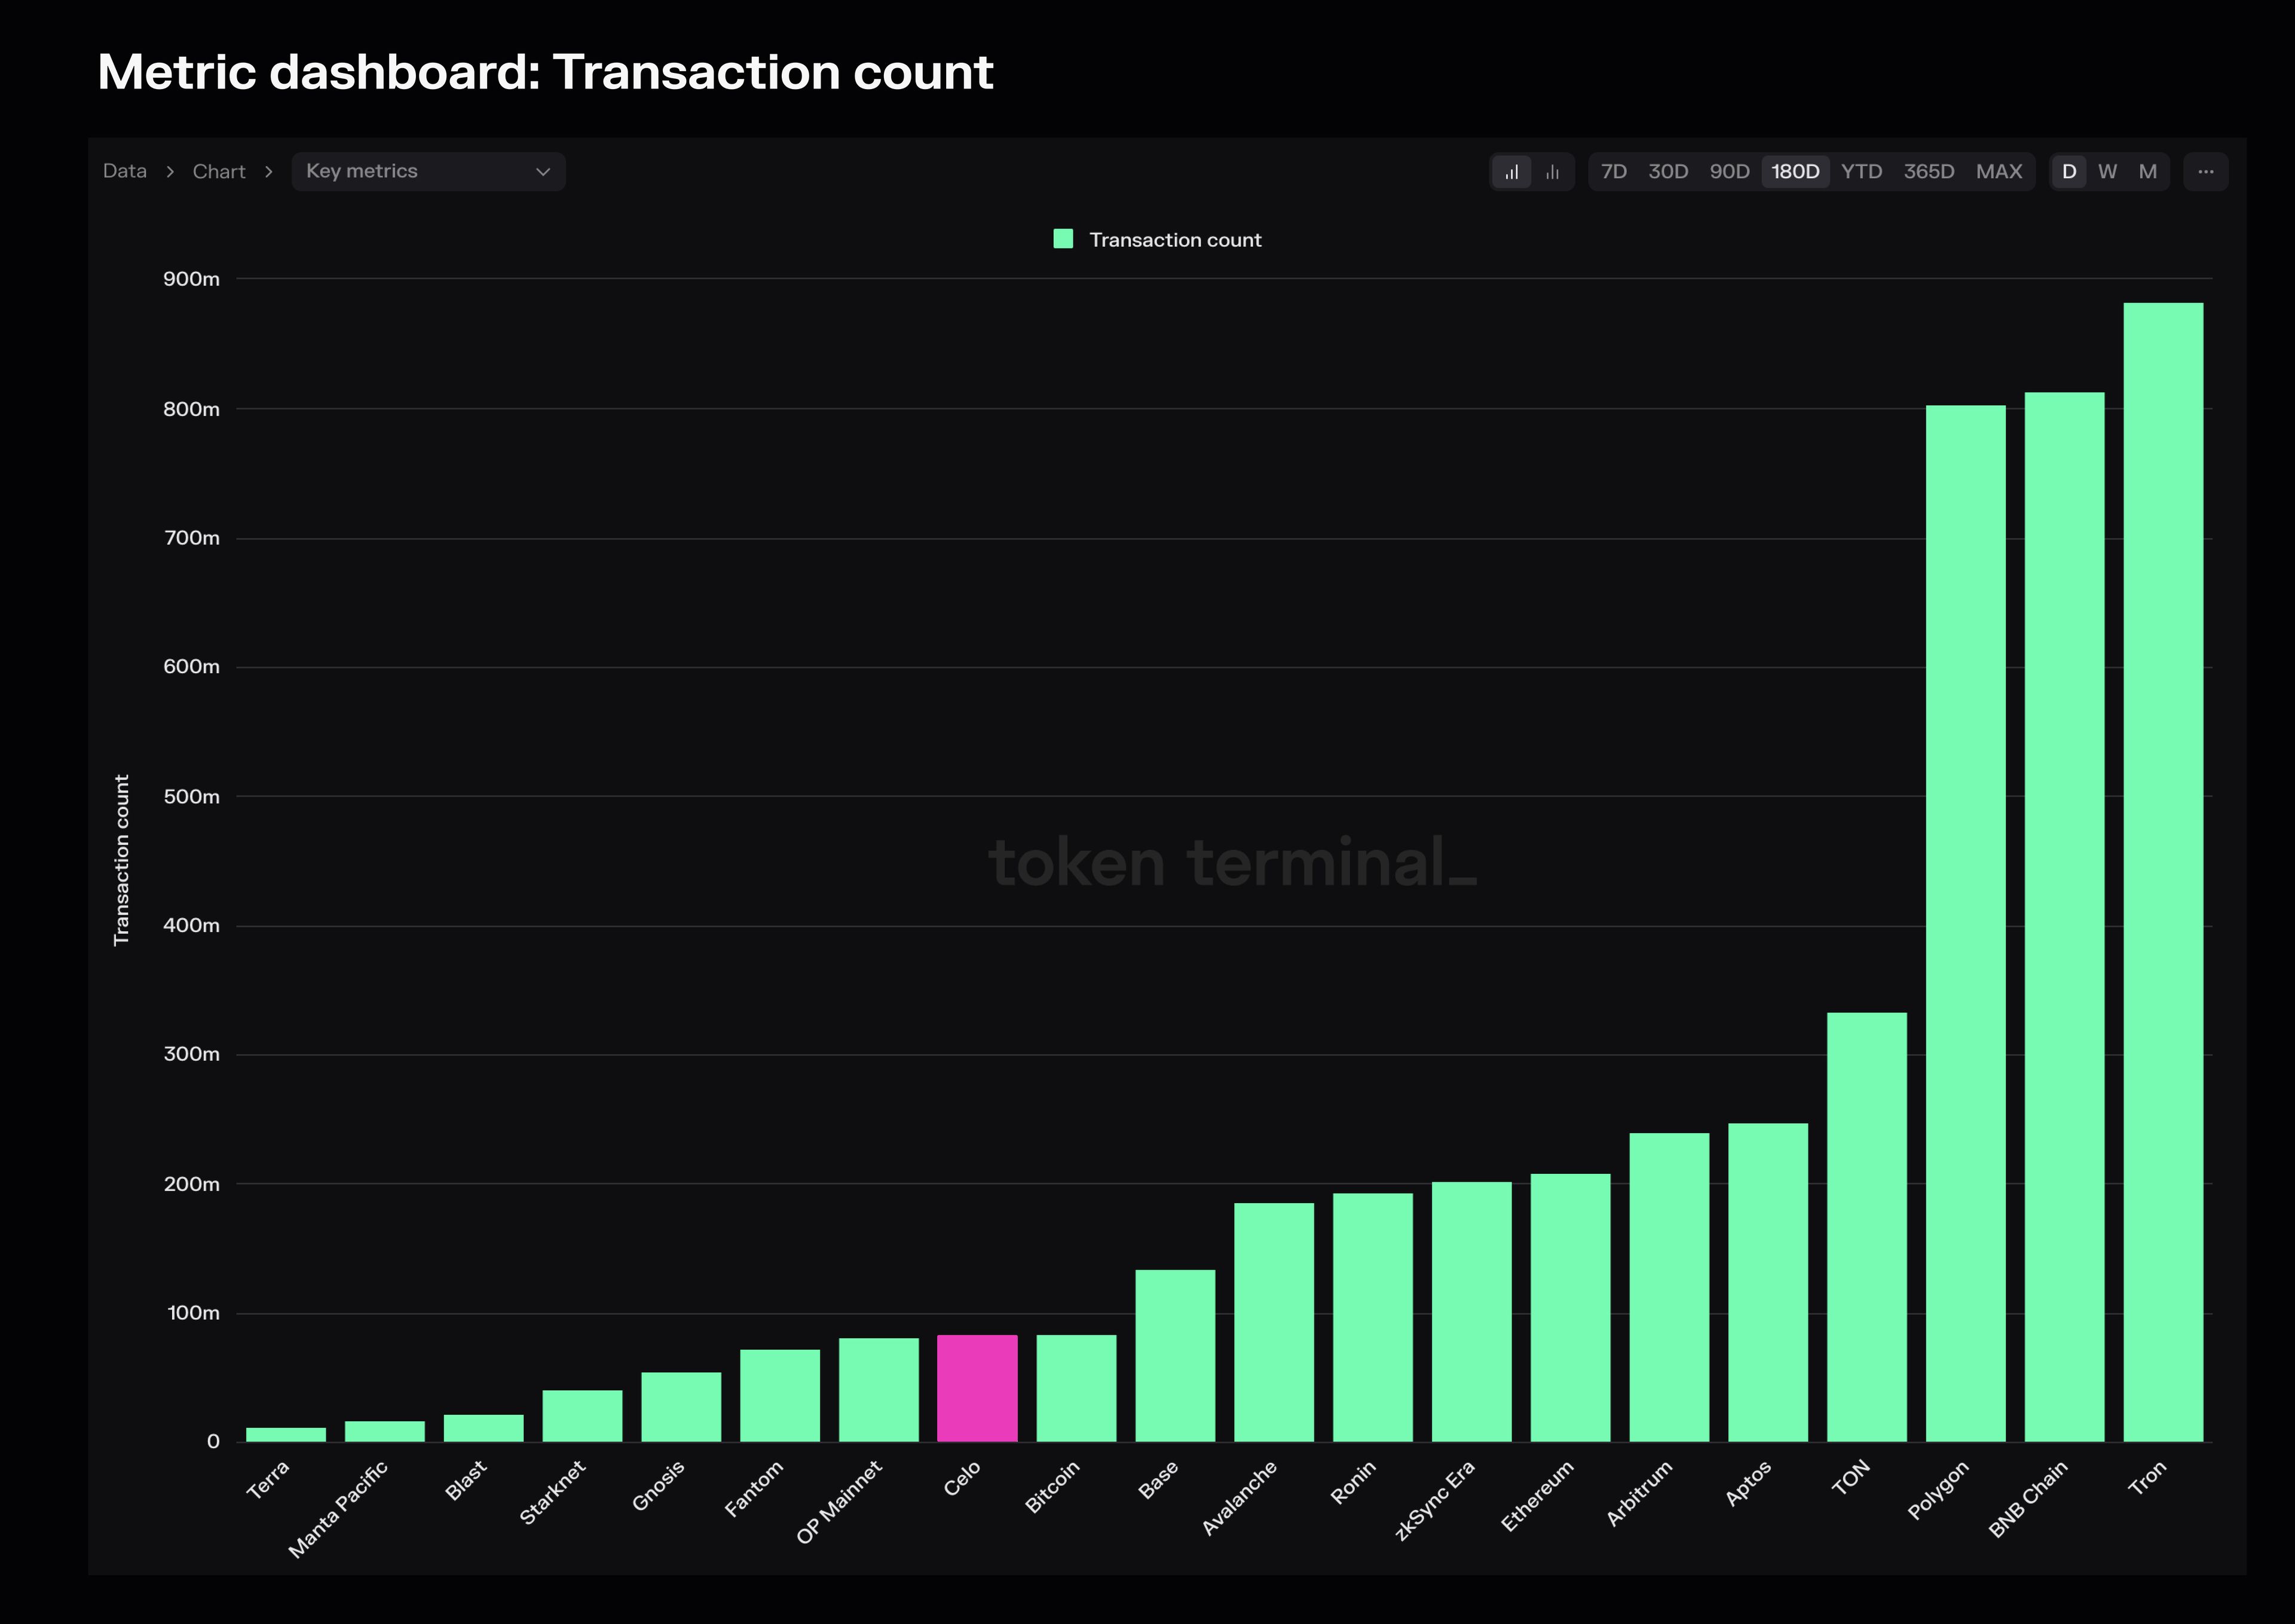 Celo highlighted on the Transaction count dashboard.